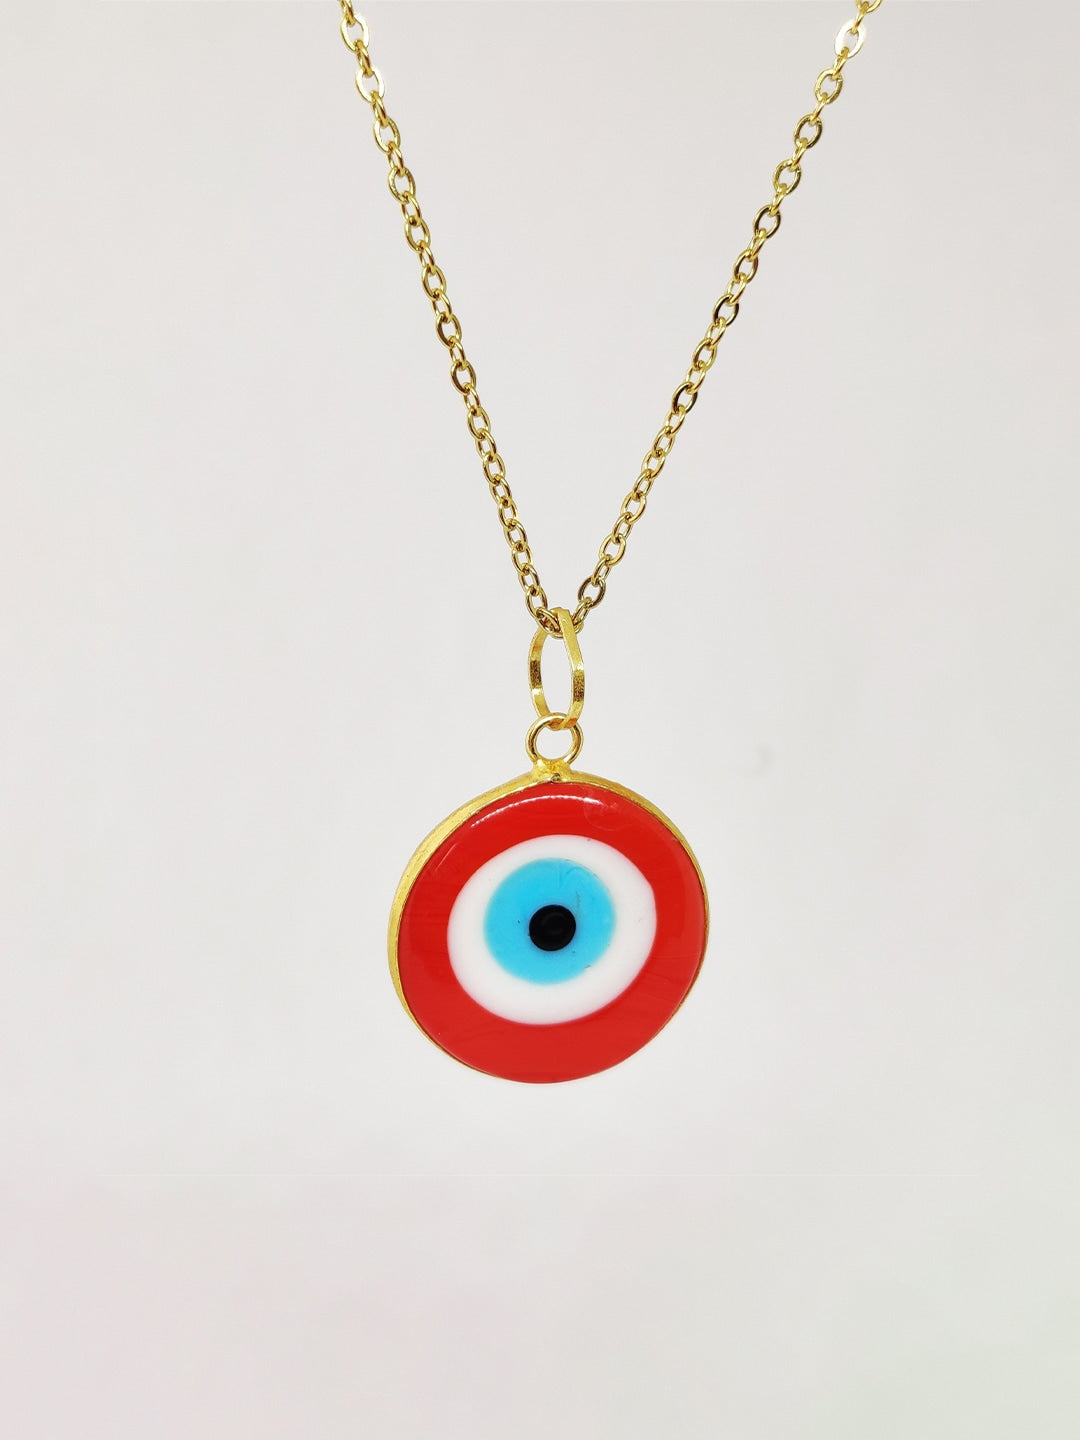 EL REGALO Women Red & Gold-Plated Evil Eye Bohemian Necklace - for Women and Girls
Style ID: 16926698